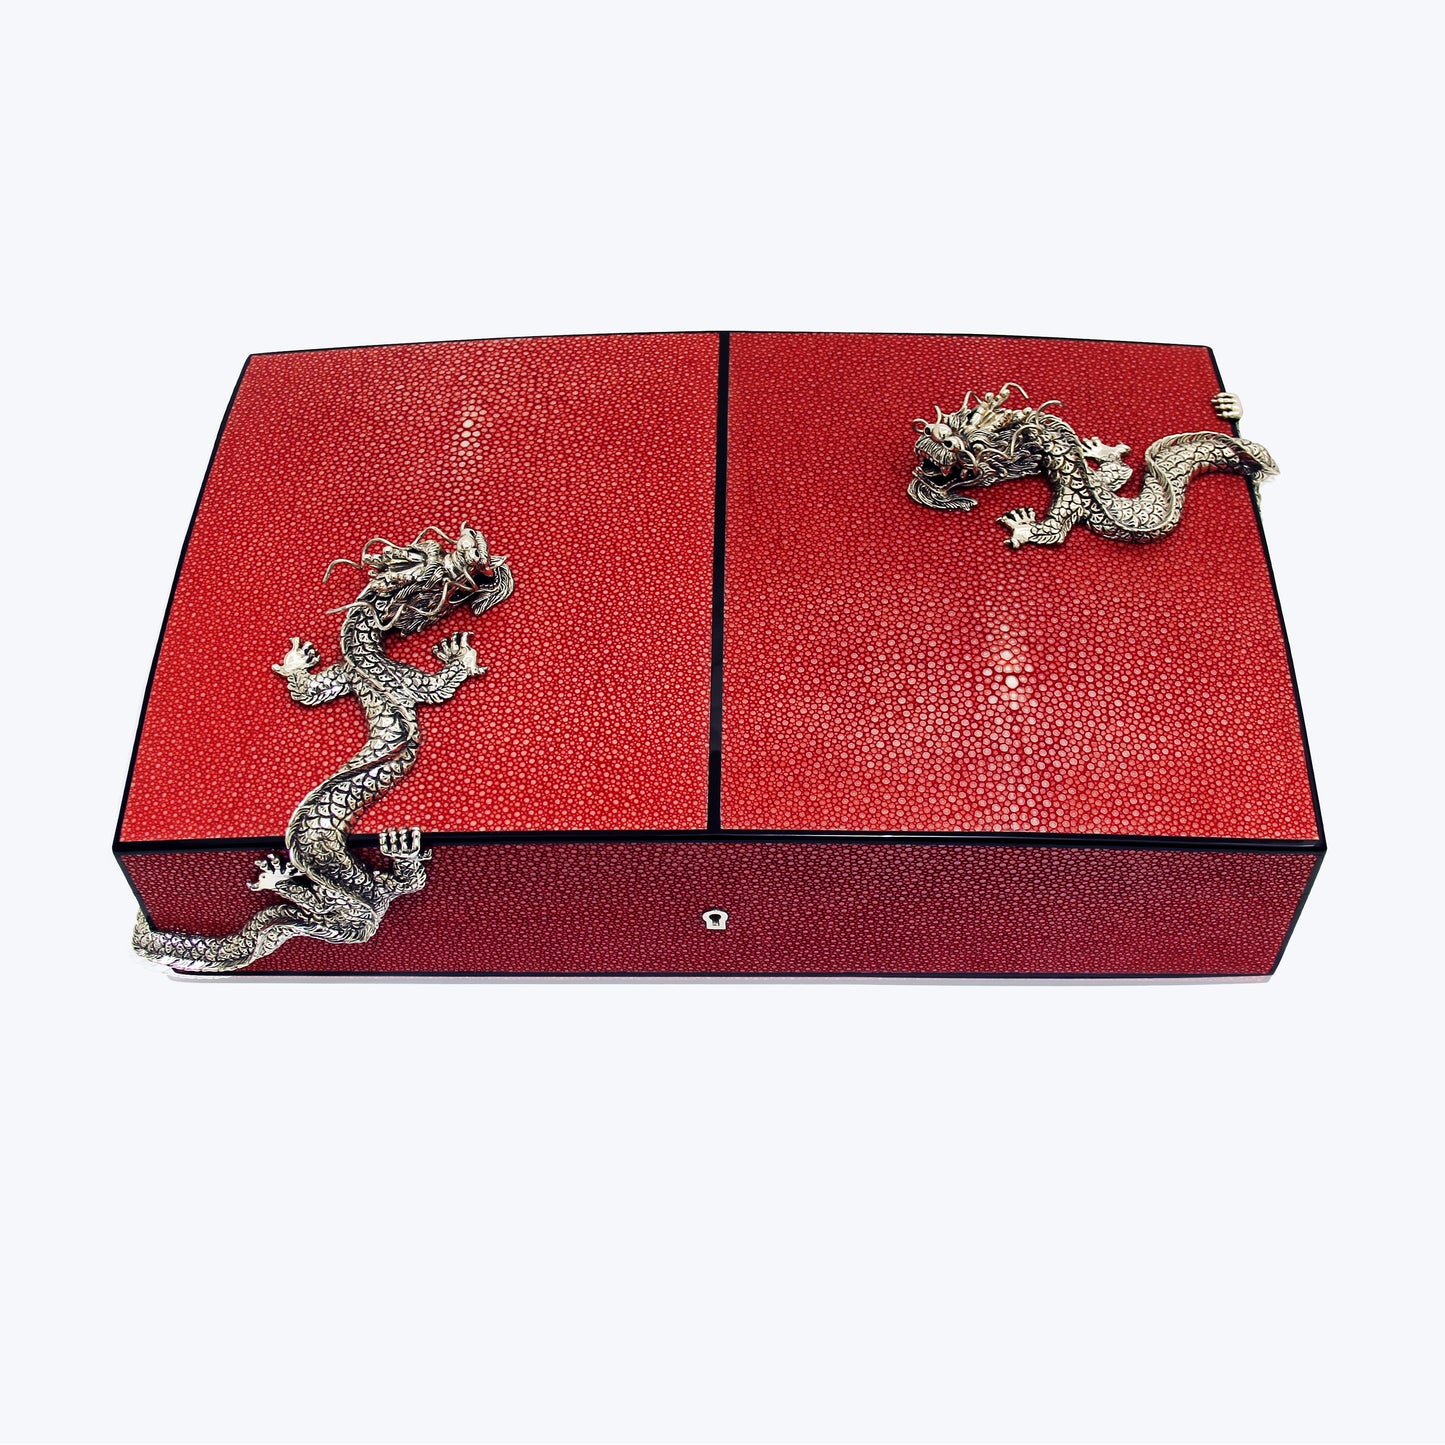 Pink Galuchat Cigar Humidor Box with Twin Swirling Dragons